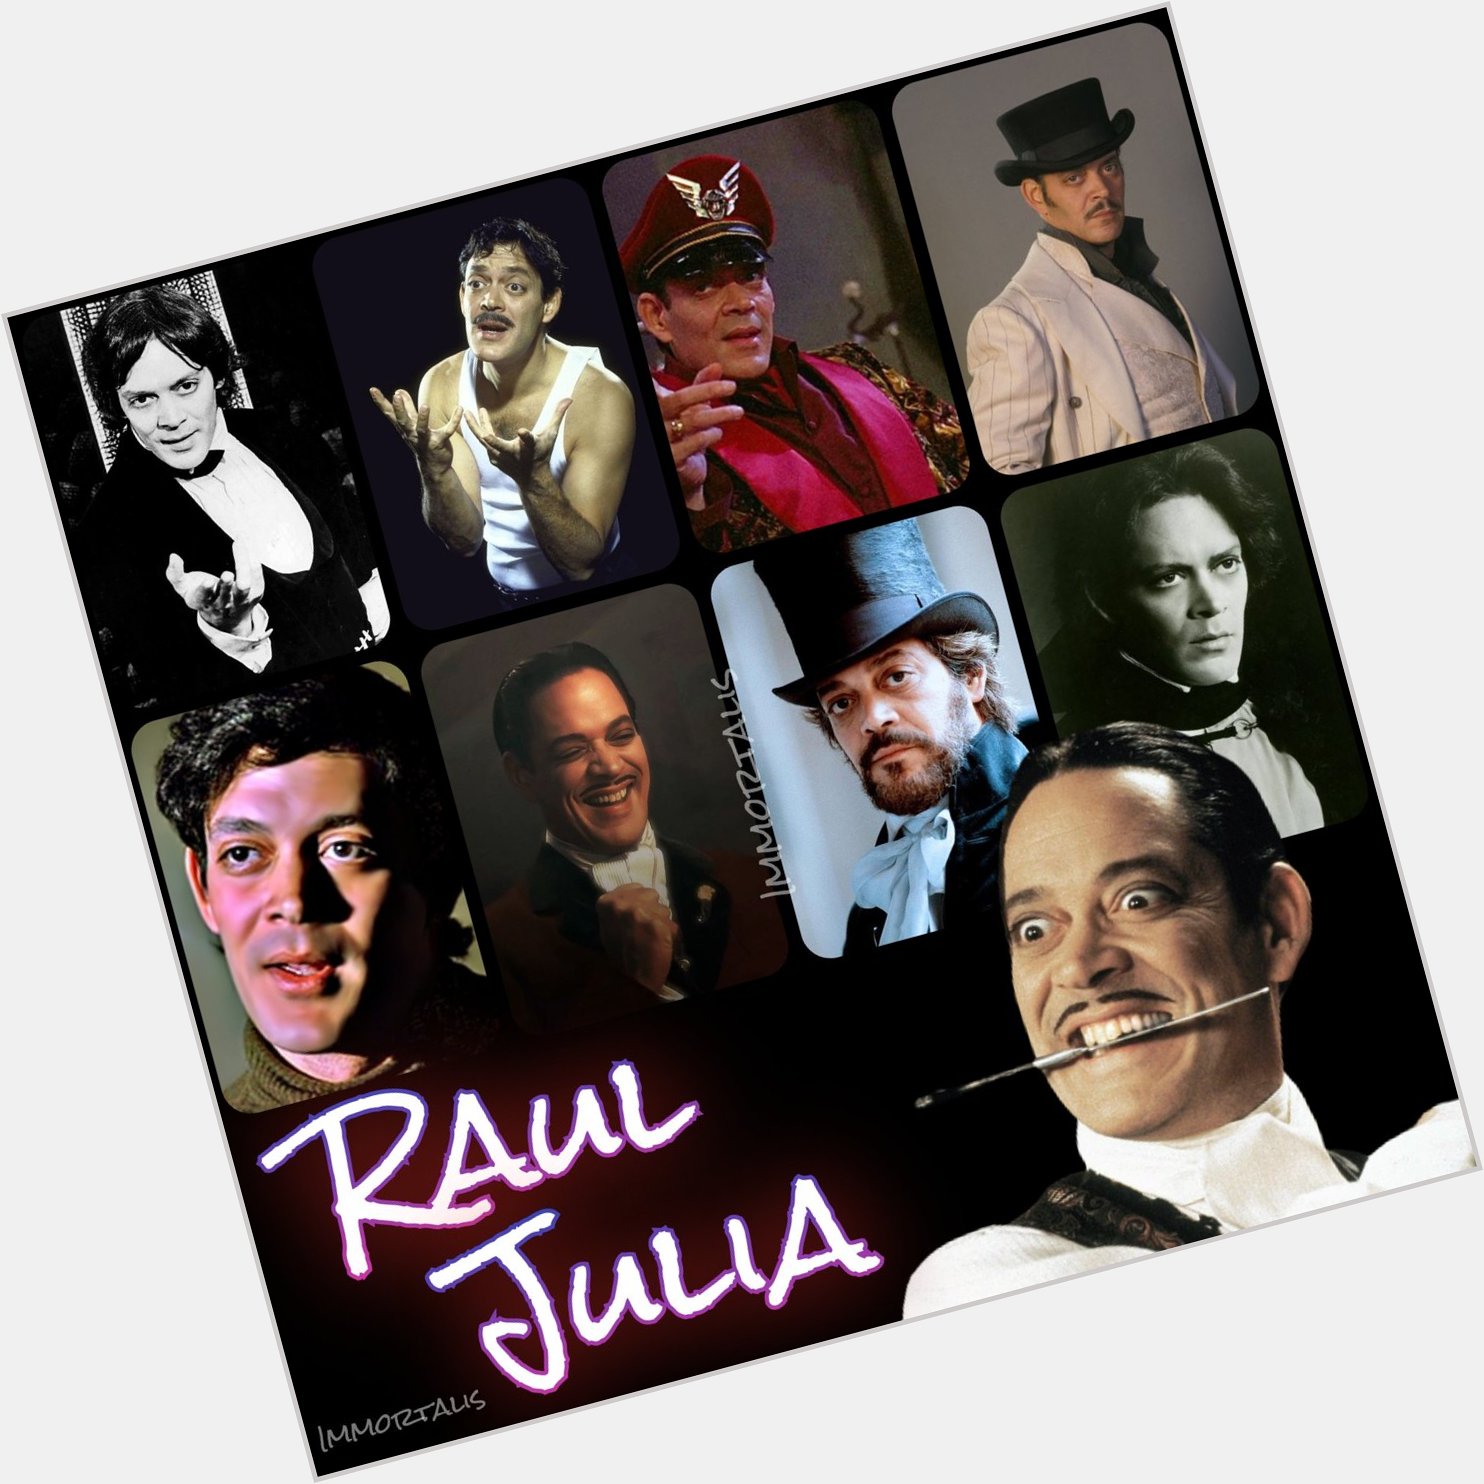 Happy birthday to the late, great, Raul Julia. 

He is missed. 